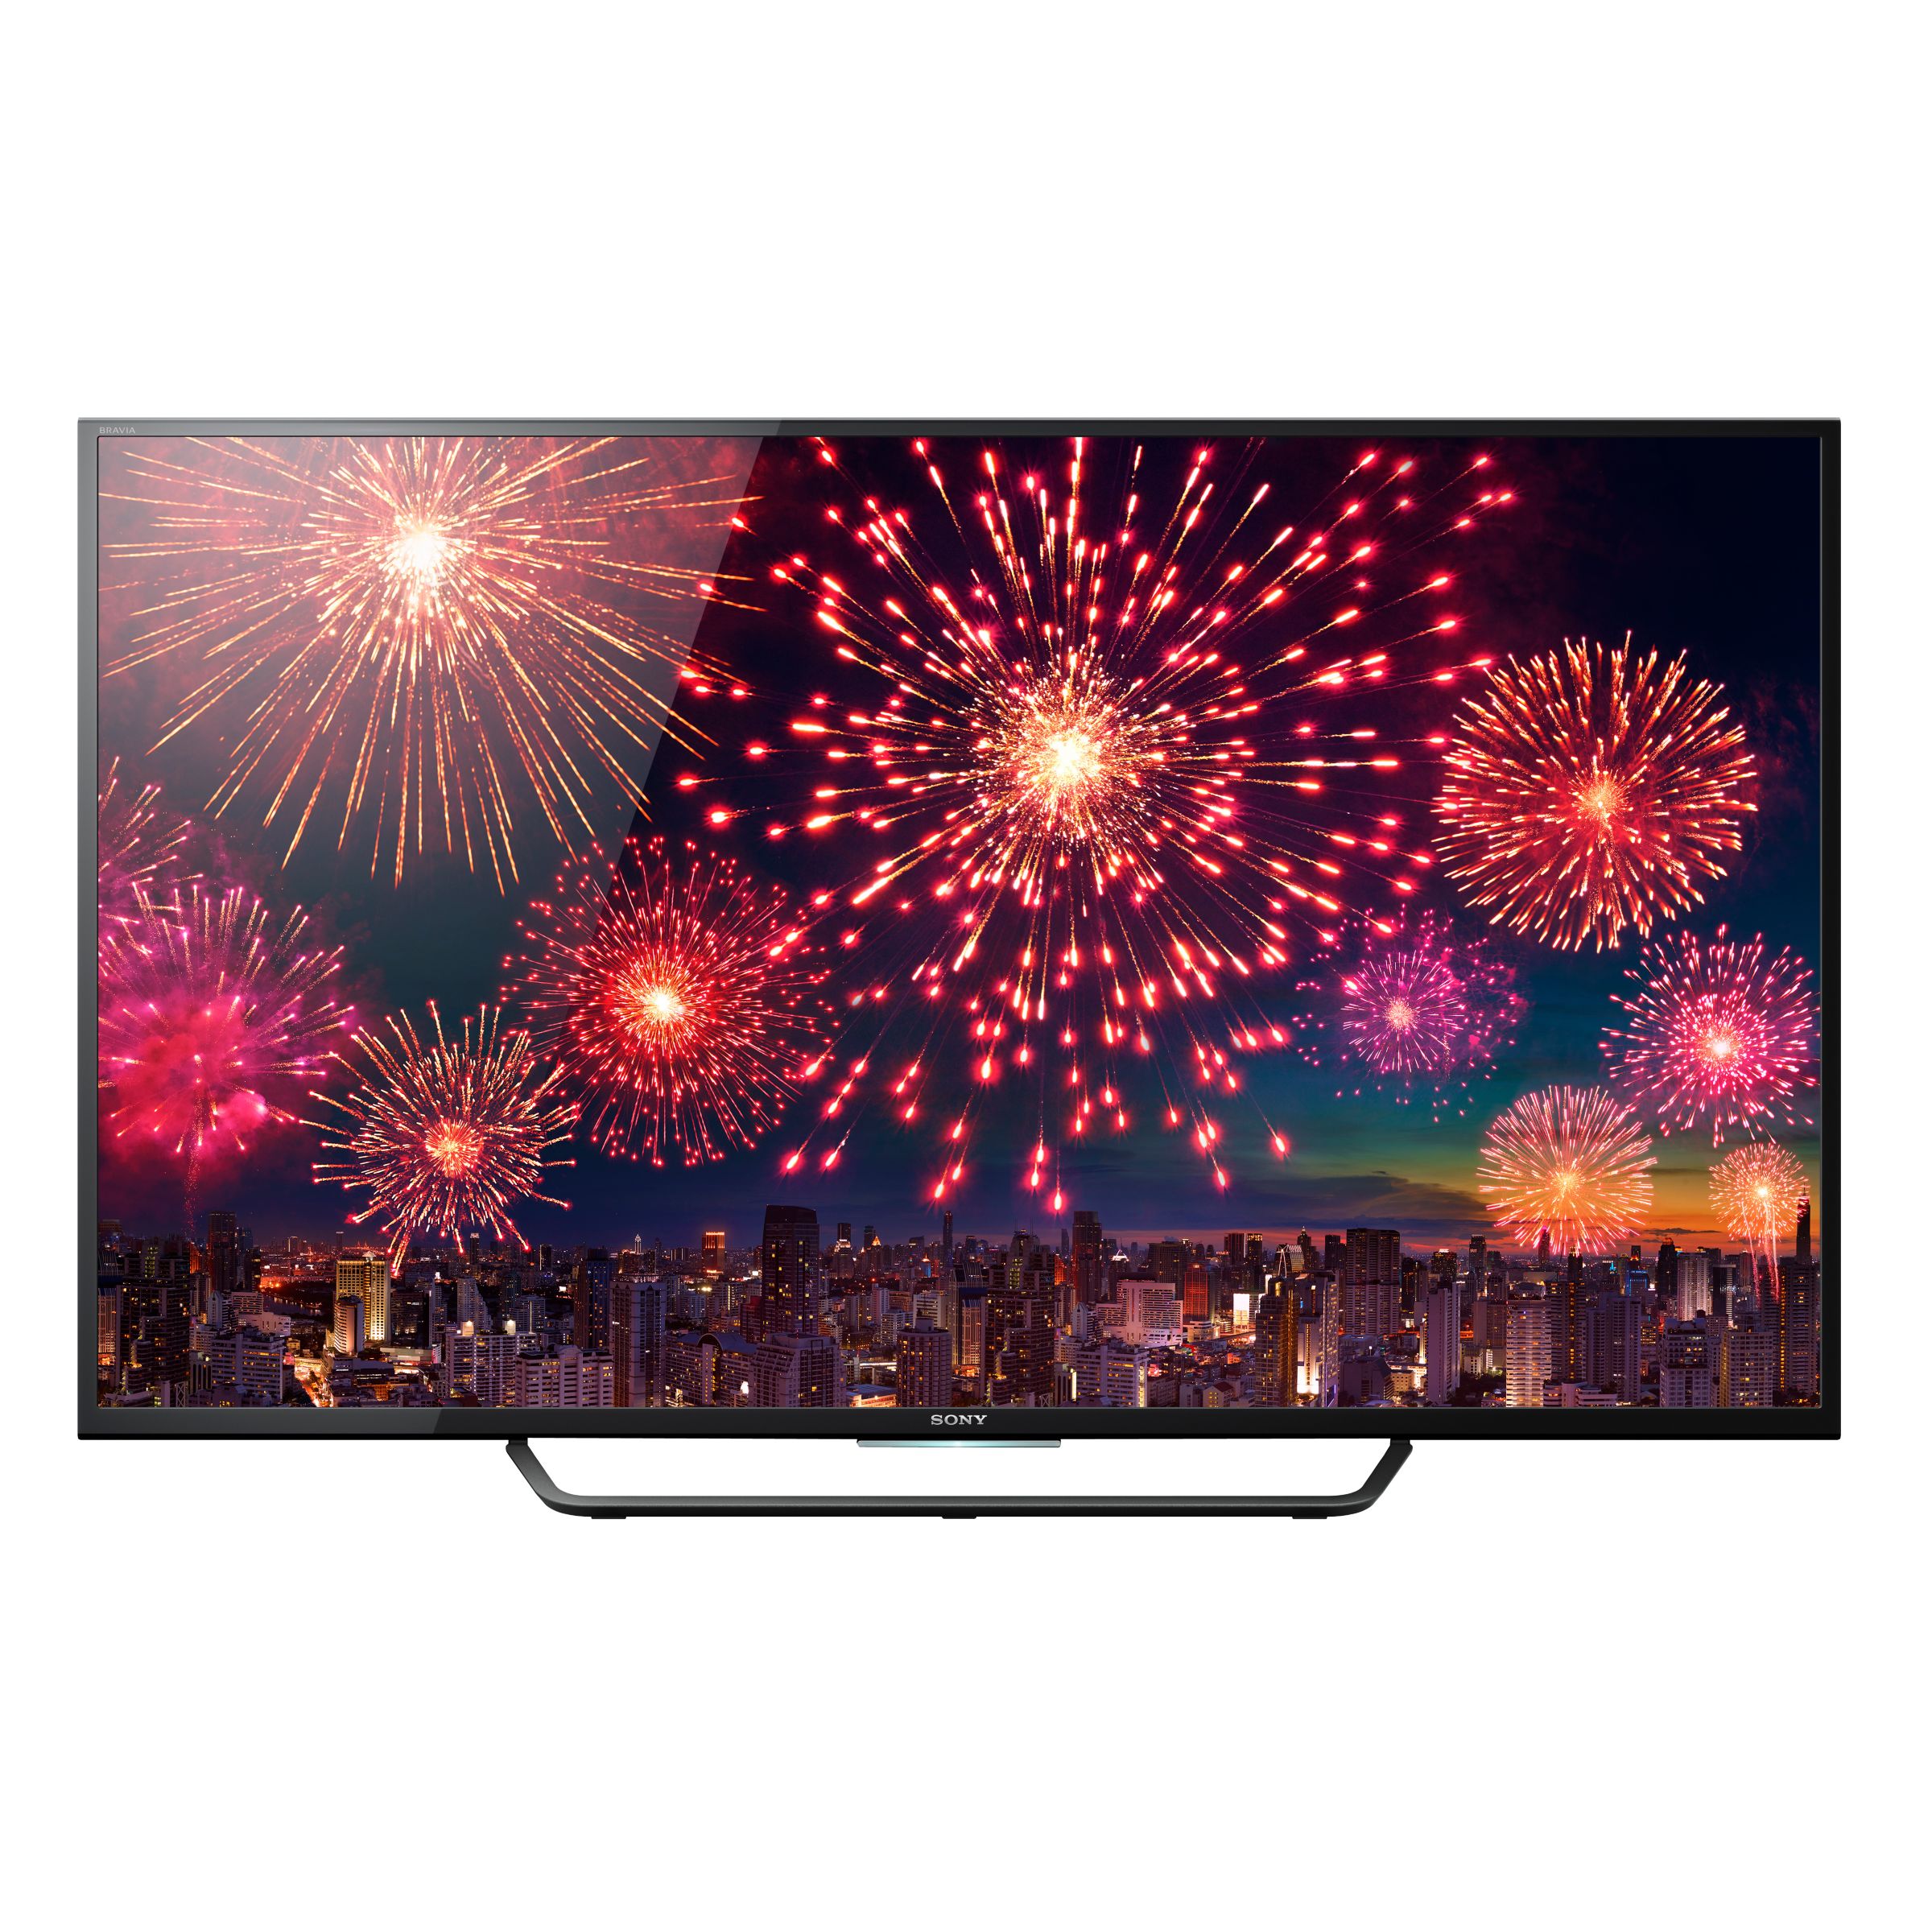 Sony Bravia KD55X8005 4K Ultra HD LED Android TV, 55" with Freeview HD, Youview & Built-In Wi-Fi